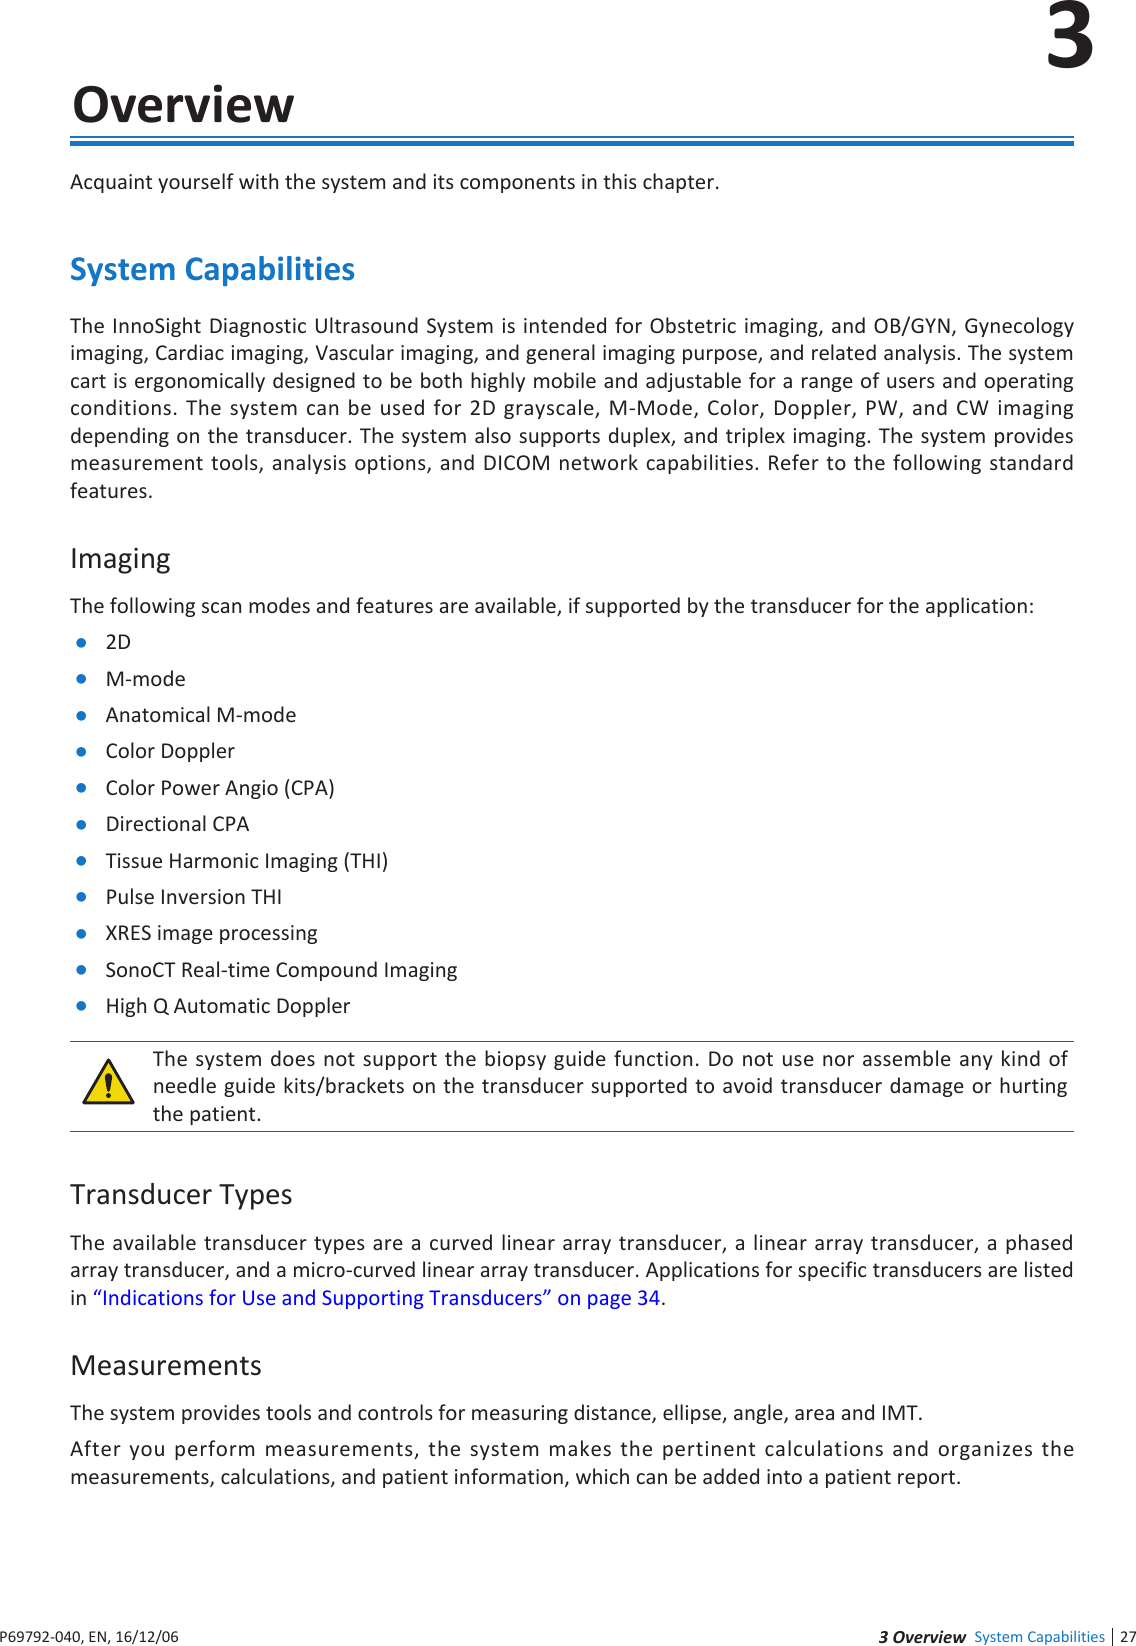 27 eie System Capabilities3P6992-4, EN, 16/12/63  OverviewAcquaint yourself with the system and its components in this chapterSystem CapabilitiesThe InnoSight Diagnostic Ultrasound System is intended for Obstetric imaging, and OB/GYN, Gynecology imaging, Cardiac imaging, Vascular imaging, and general imaging purpose, and related analysis The system cart is ergonomically designed to be both highly mobile and adjustable for a range of users and operating conditions The system can be used for 2D grayscale, M-Mode, Color, Doppler, PW, and CW imaging depending on the transducer The system also supports duplex, and triplex imaging The system provides measurement tools, analysis options, and DICOM network capabilities Refer to the following standard featuresImagingThe following scan modes and features are available, if supported by the transducer for the application: 2D M-mode Anatomical M-mode Color Doppler Color Power Angio (CPA) Directional CPA Tissue Harmonic Imaging (THI) Pulse Inversion THI RES image processing SonoCT Real-time Compound Imaging High Q Automatic DopplerThe system does not support the biopsy guide function Do not use nor assemble any kind of needle guide kits/brackets on the transducer supported to avoid transducer damage or hurting the patientTransducer TypesThe available transducer types are a curved linear array transducer, a linear array transducer, a phased array transducer, and a micro-curved linear array transducer Applications for specific transducers are listed in Indications for Use and Supporting Transducers on page 34MeasurementsThe system provides tools and controls for measuring distance, ellipse, angle, area and IMTAfter you perform measurements, the system makes the pertinent calculations and organizes the measurements, calculations, and patient information, which can be added into a patient report